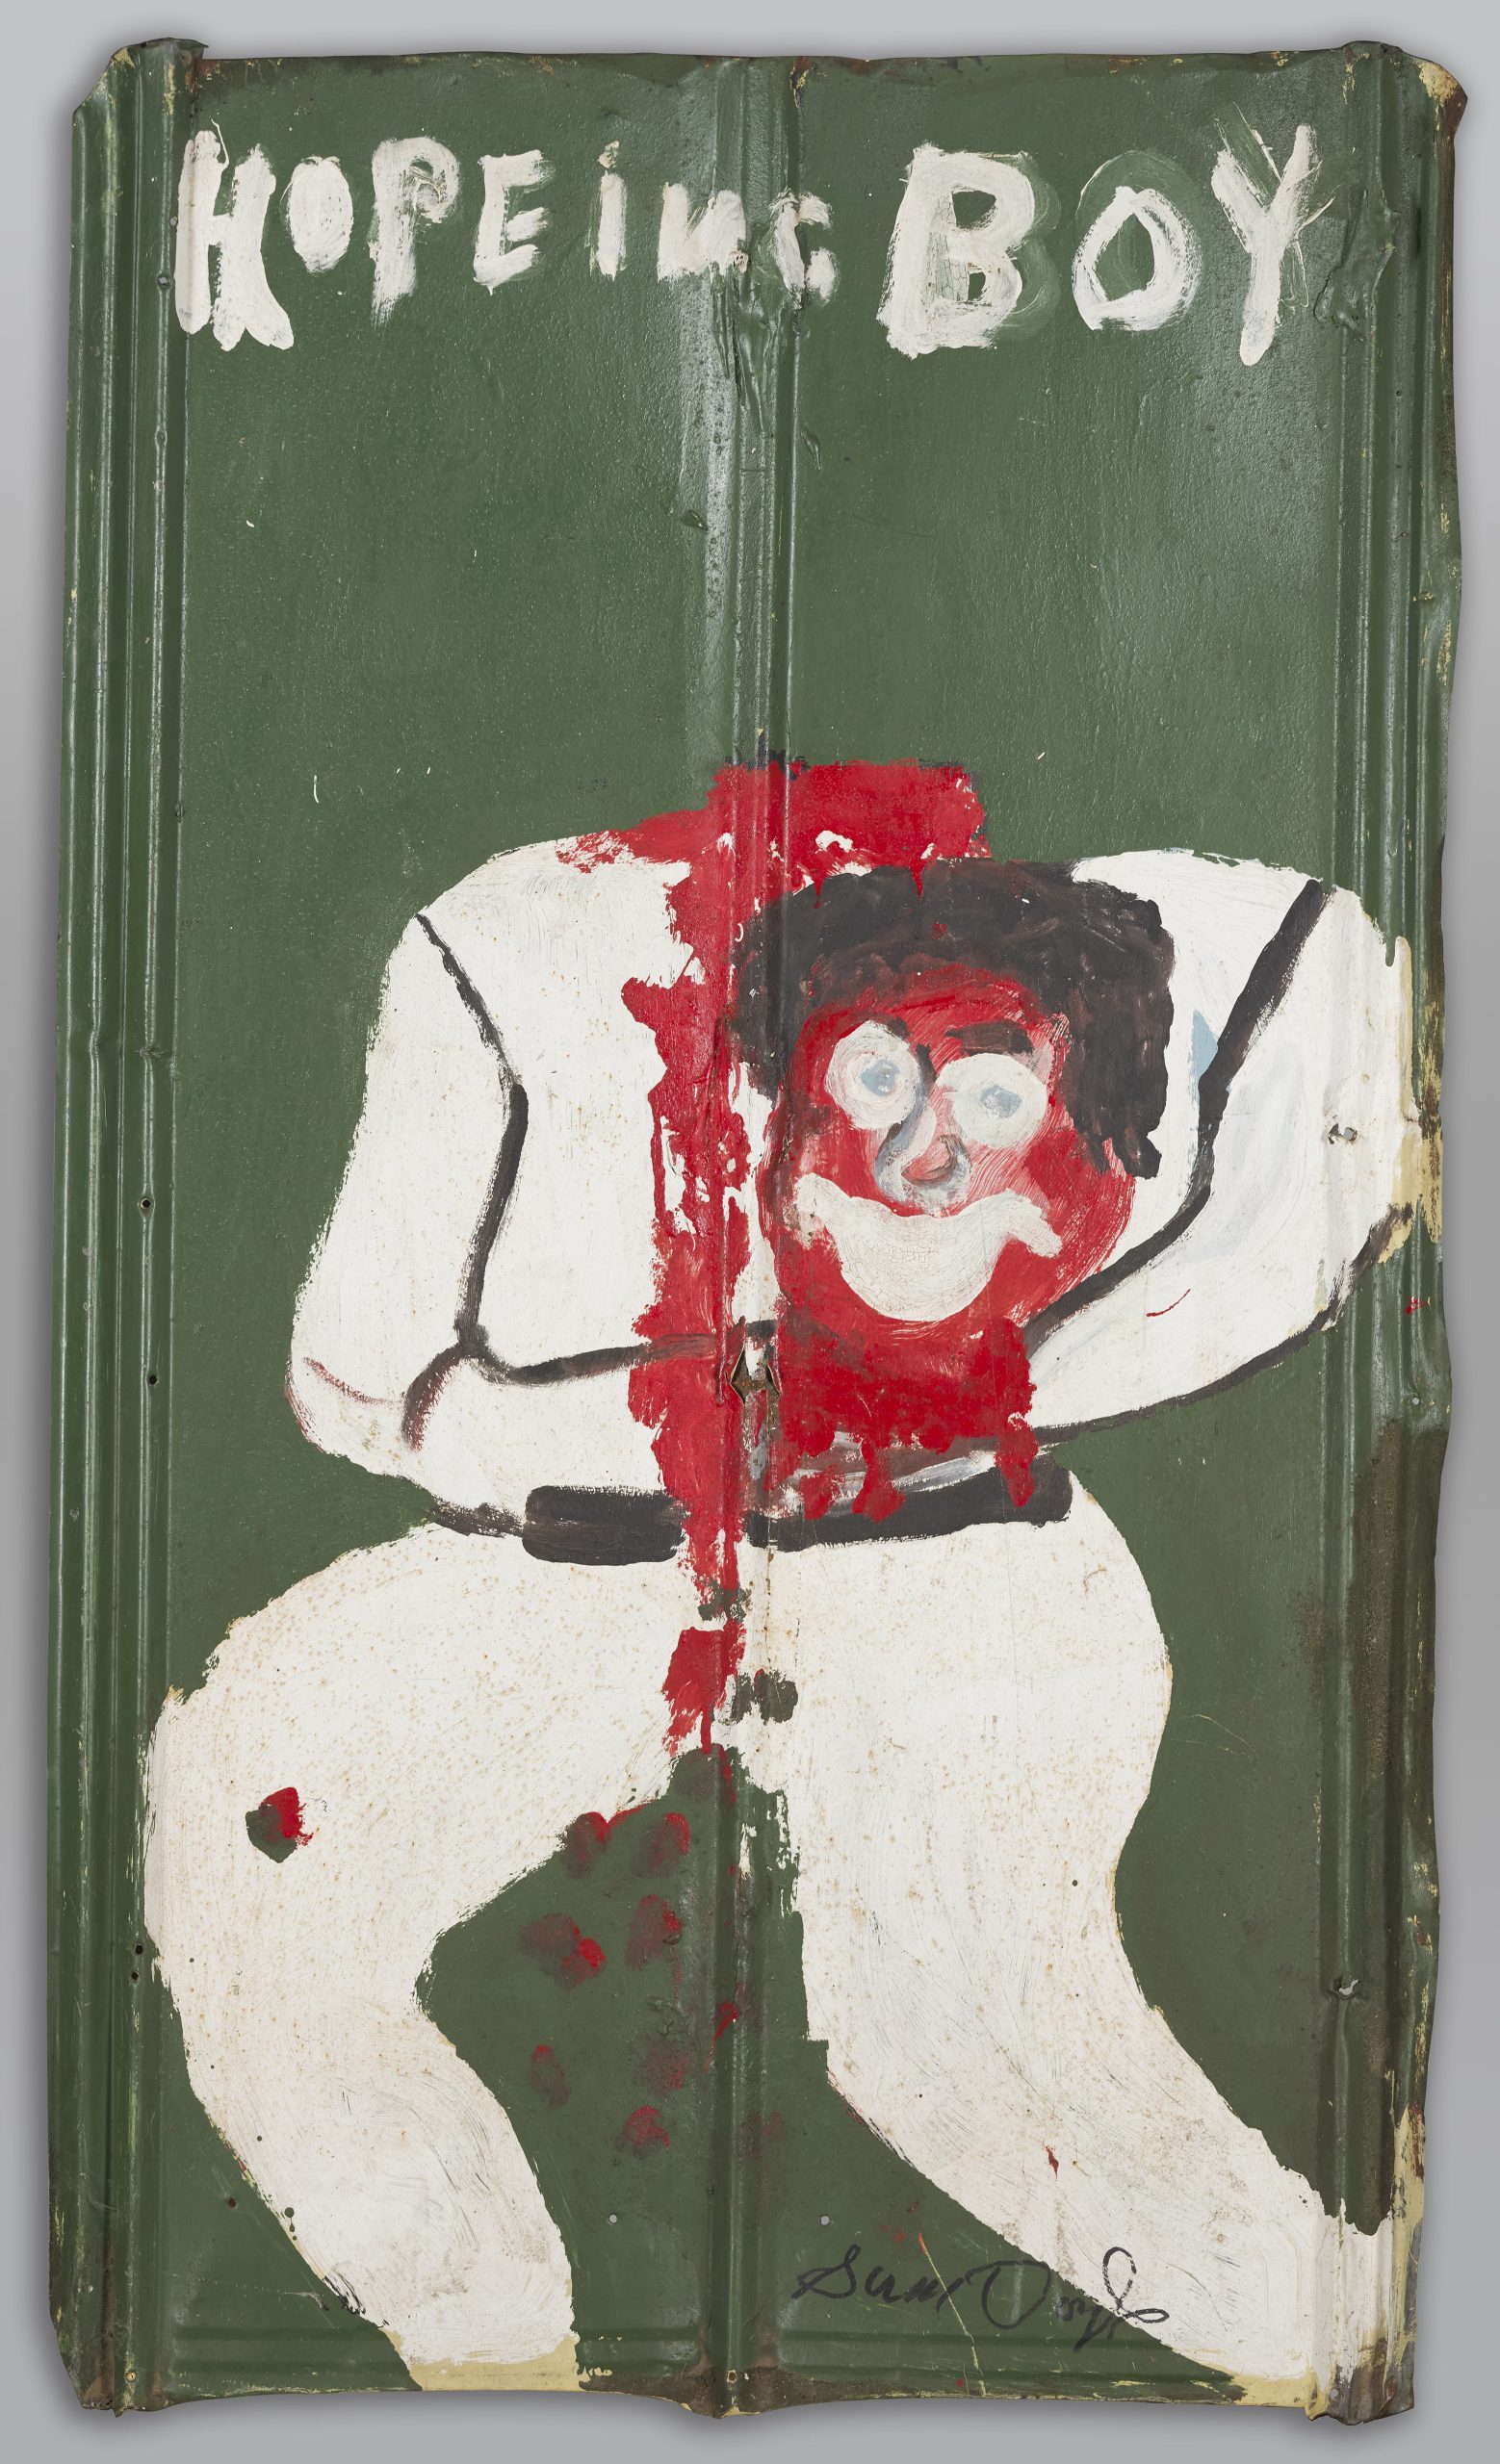 A painting of a headless white figure holding its own bleeding head